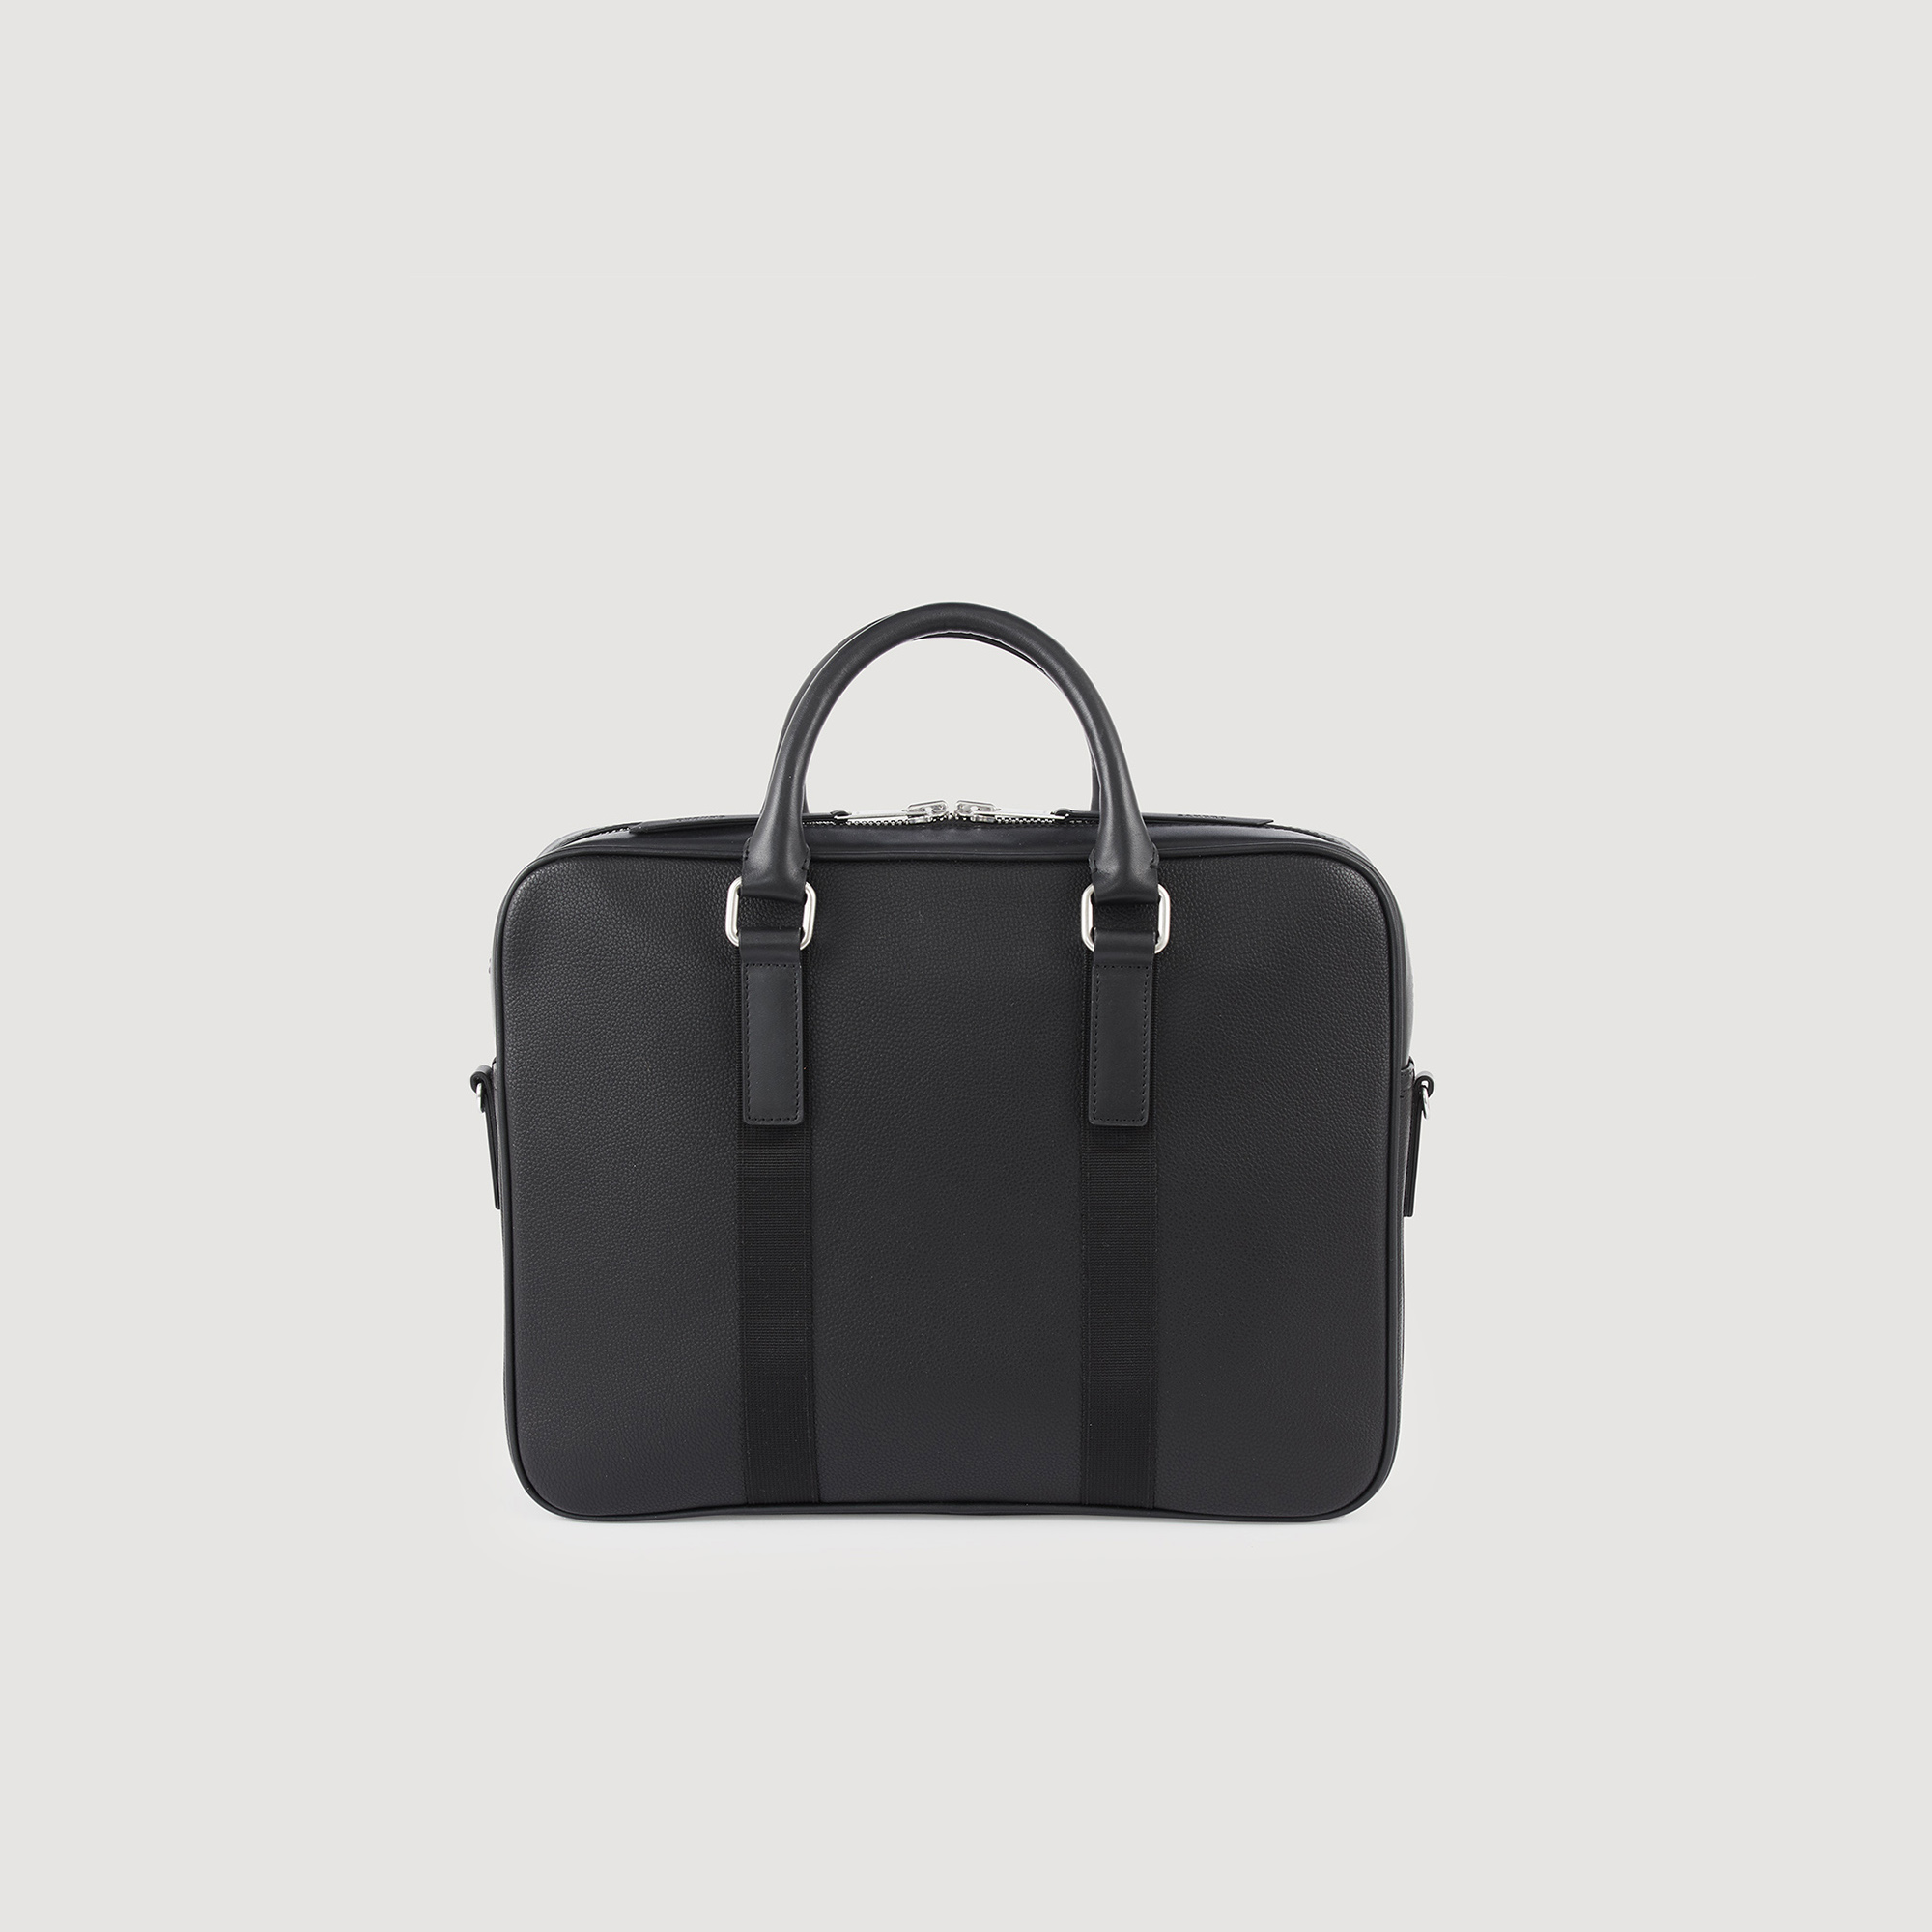 Sandro polyester Lining: Large zipped briefcase in grained coated canvas with an adjustable and detachable shoulder strap, short handles and a detachable luggage tag